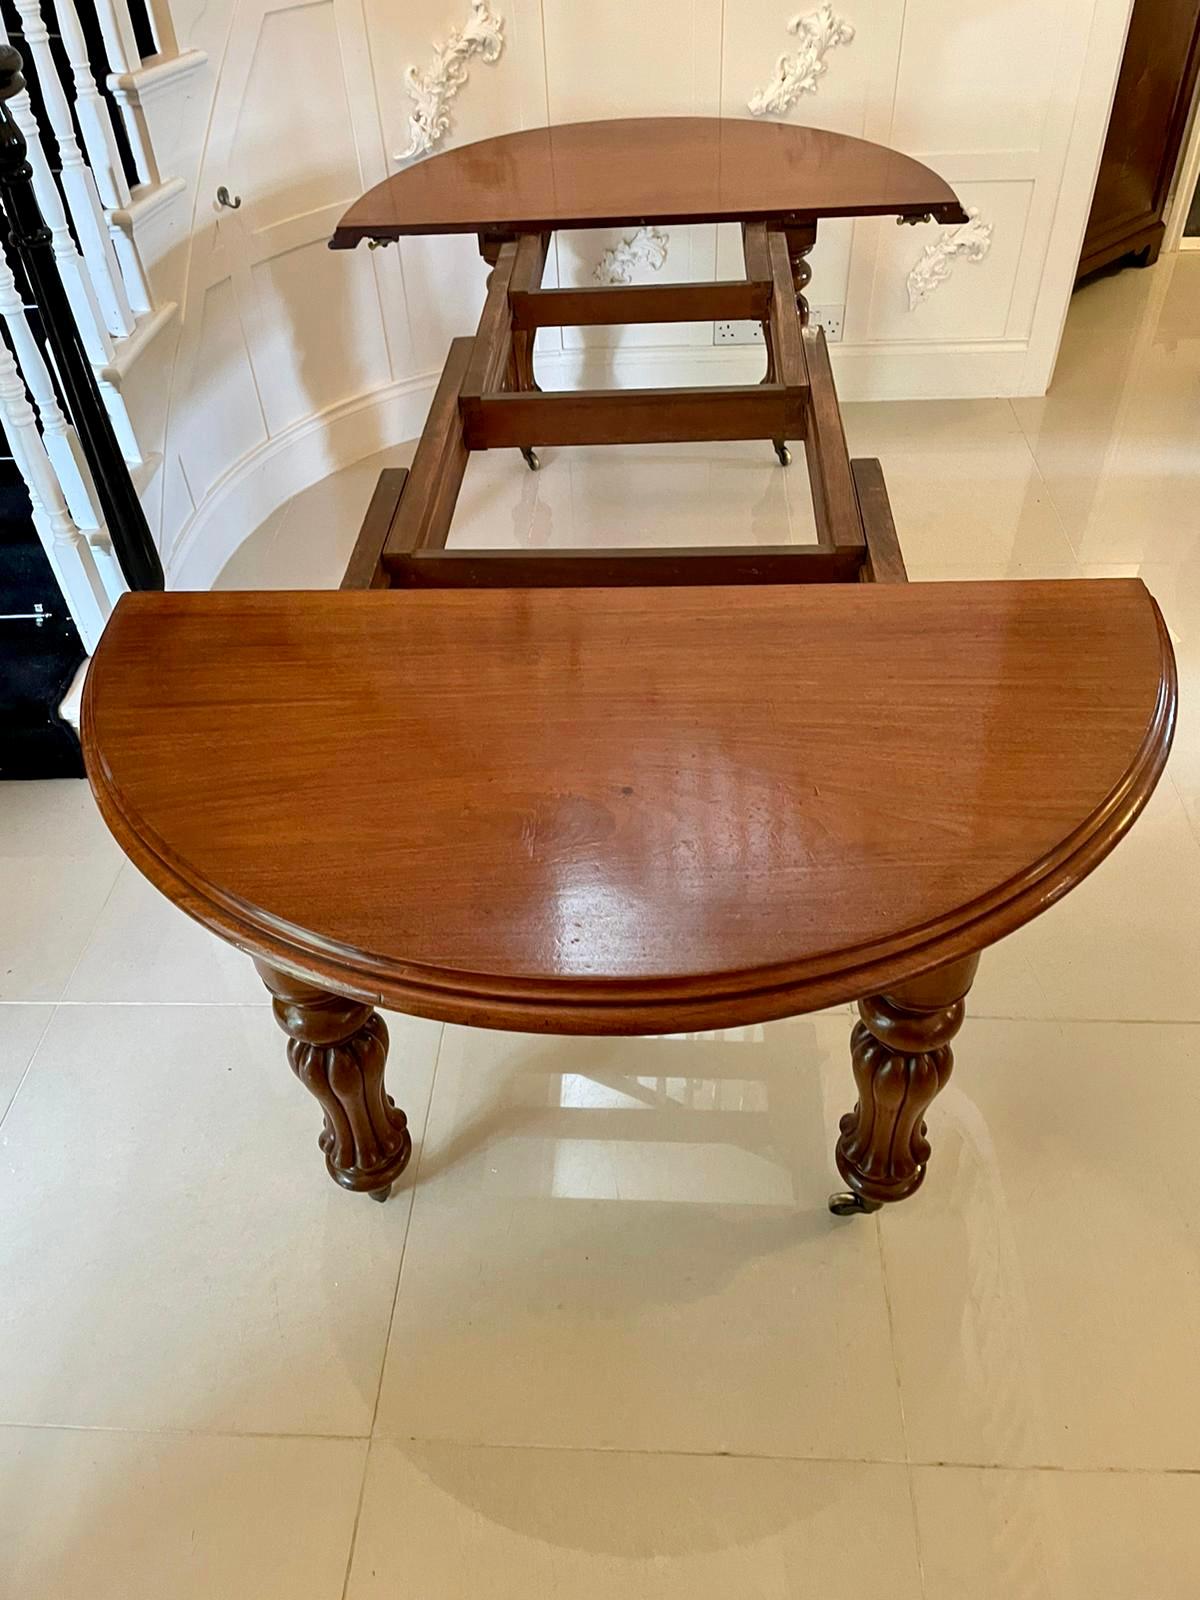 Antique Victorian mahogany extending dining table having a quality mahogany round top with a double moulded edge, three extra leaves extending to make a D end shaped dining table. It stands on shaped fluted reeded legs with original cup